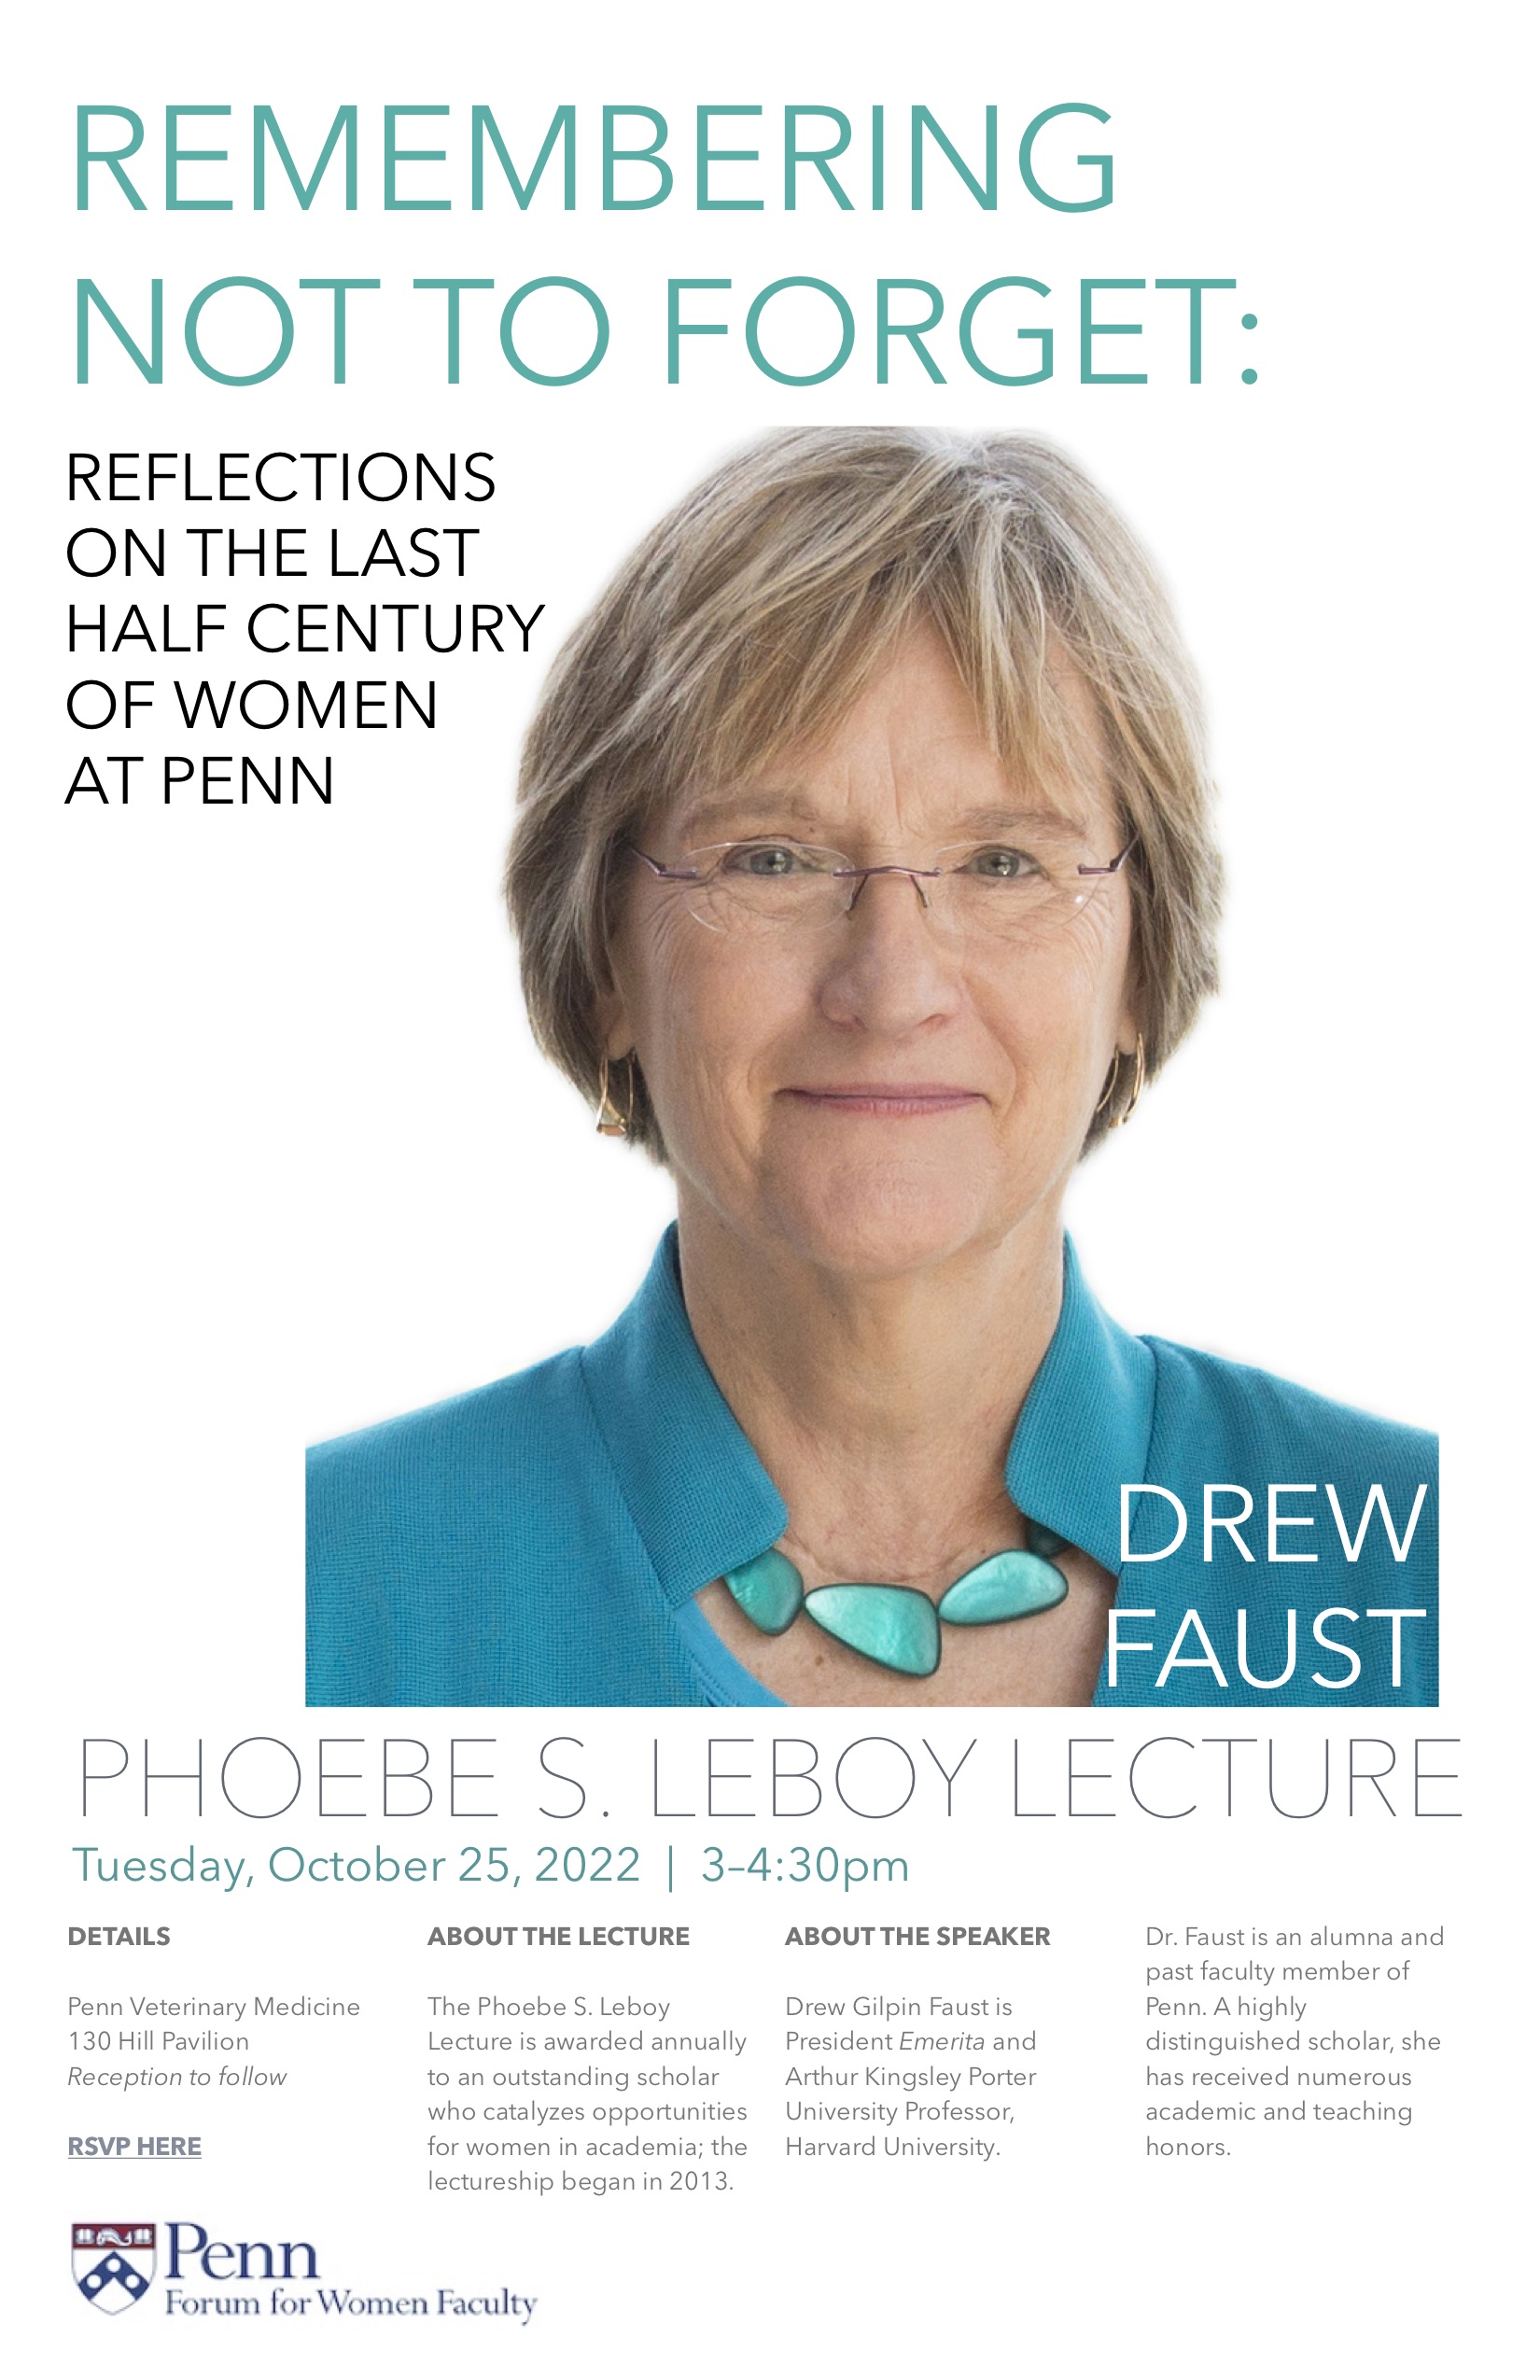 Drew Faust Poster